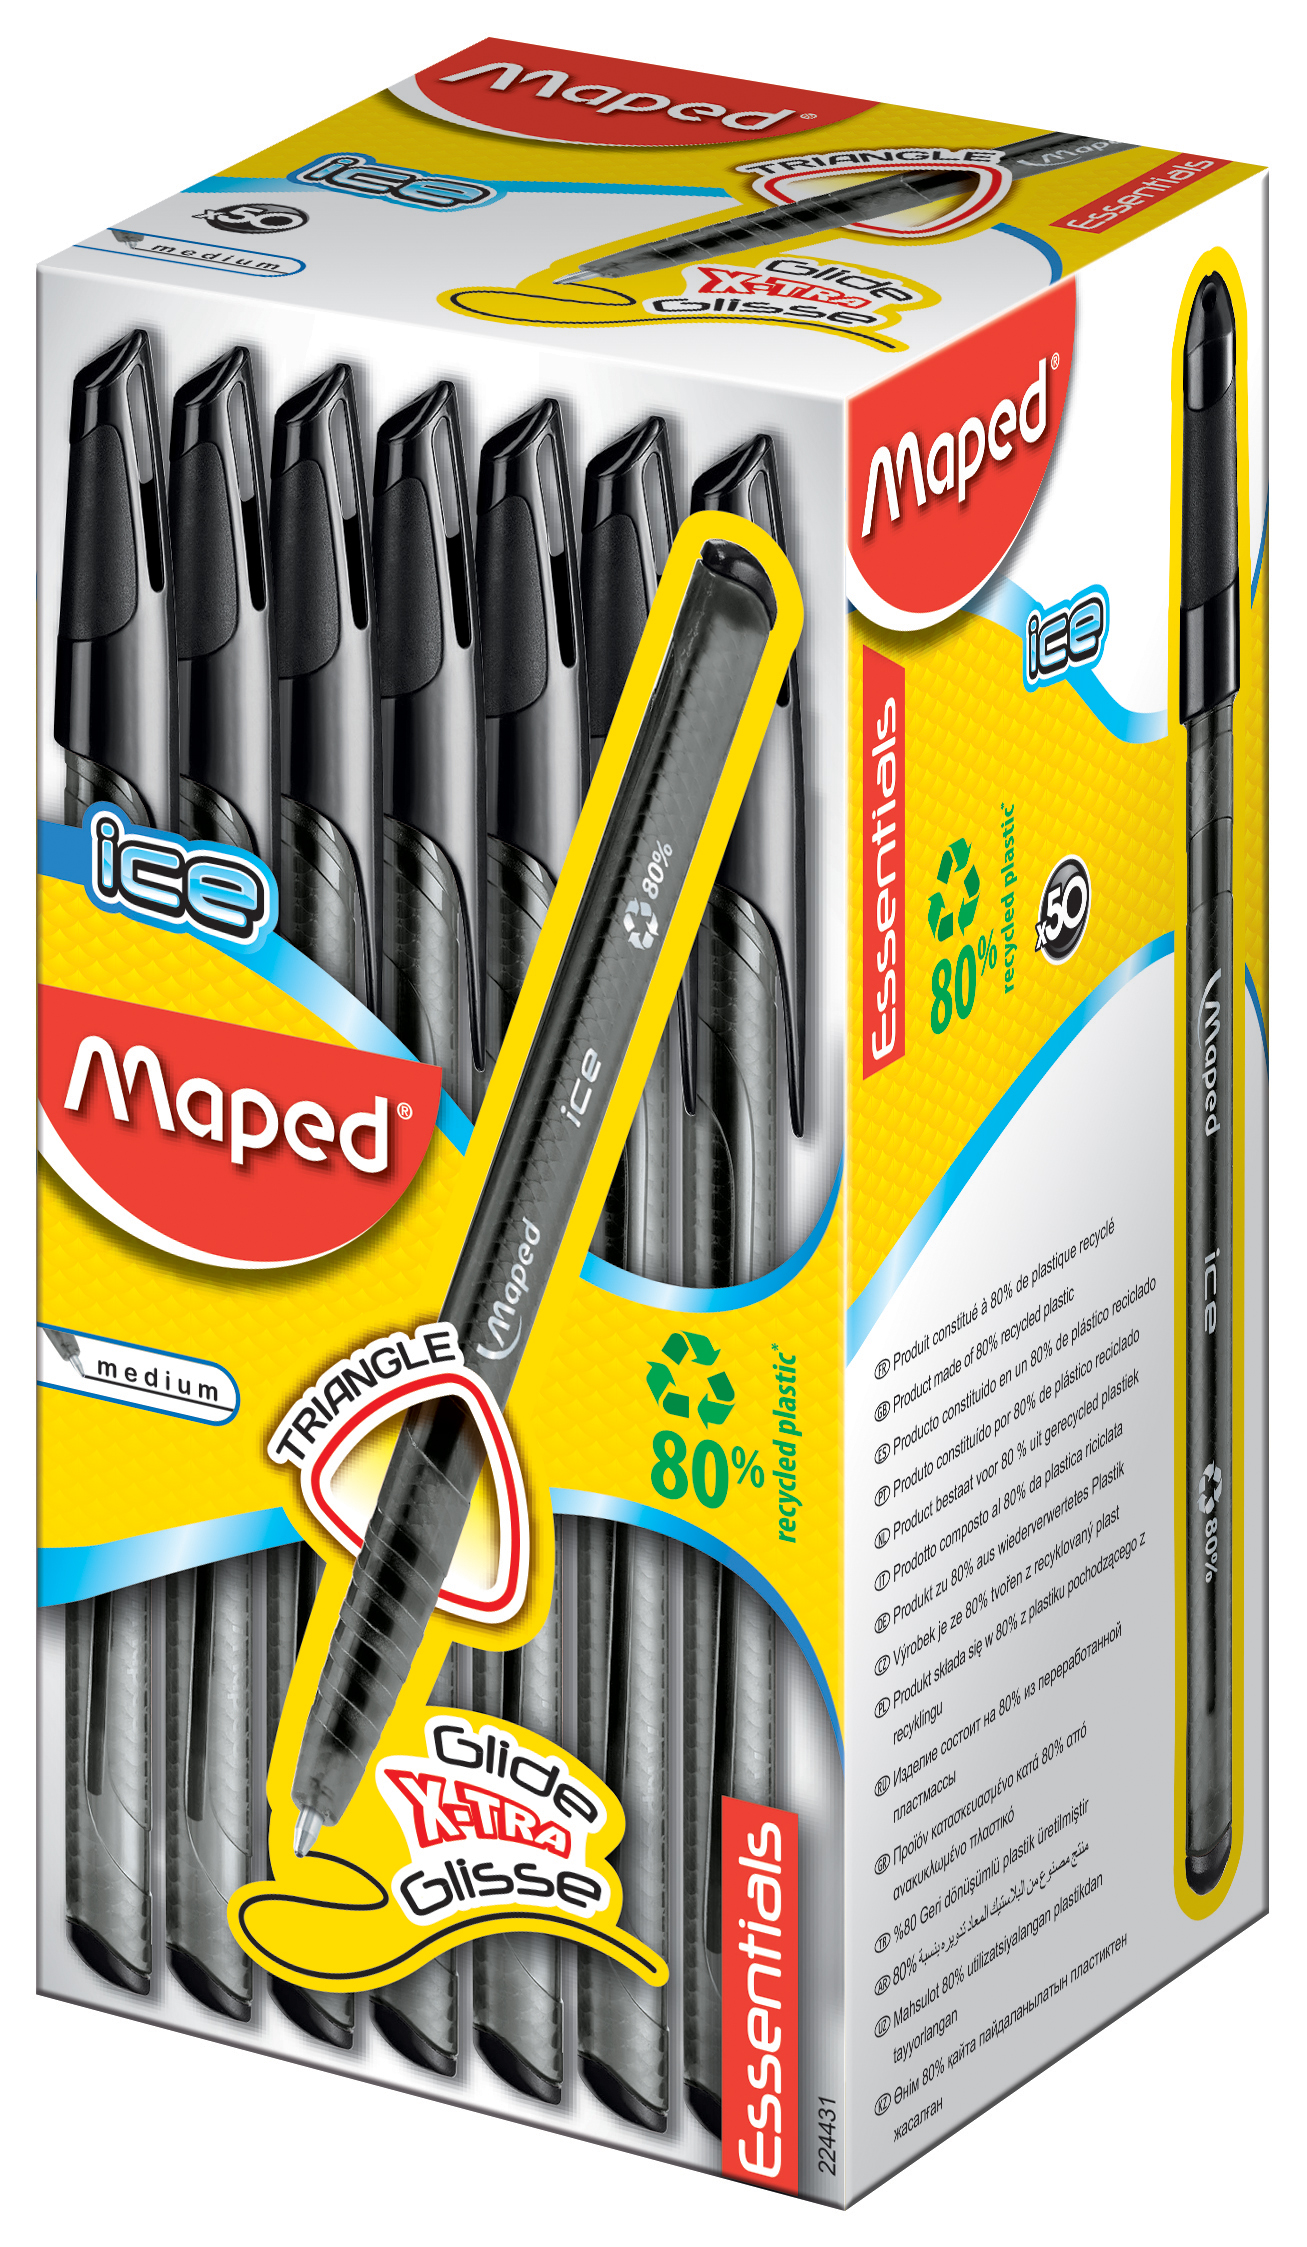   MAPED GREEN ICE  ,    - 0,6,       , 80%  ,   